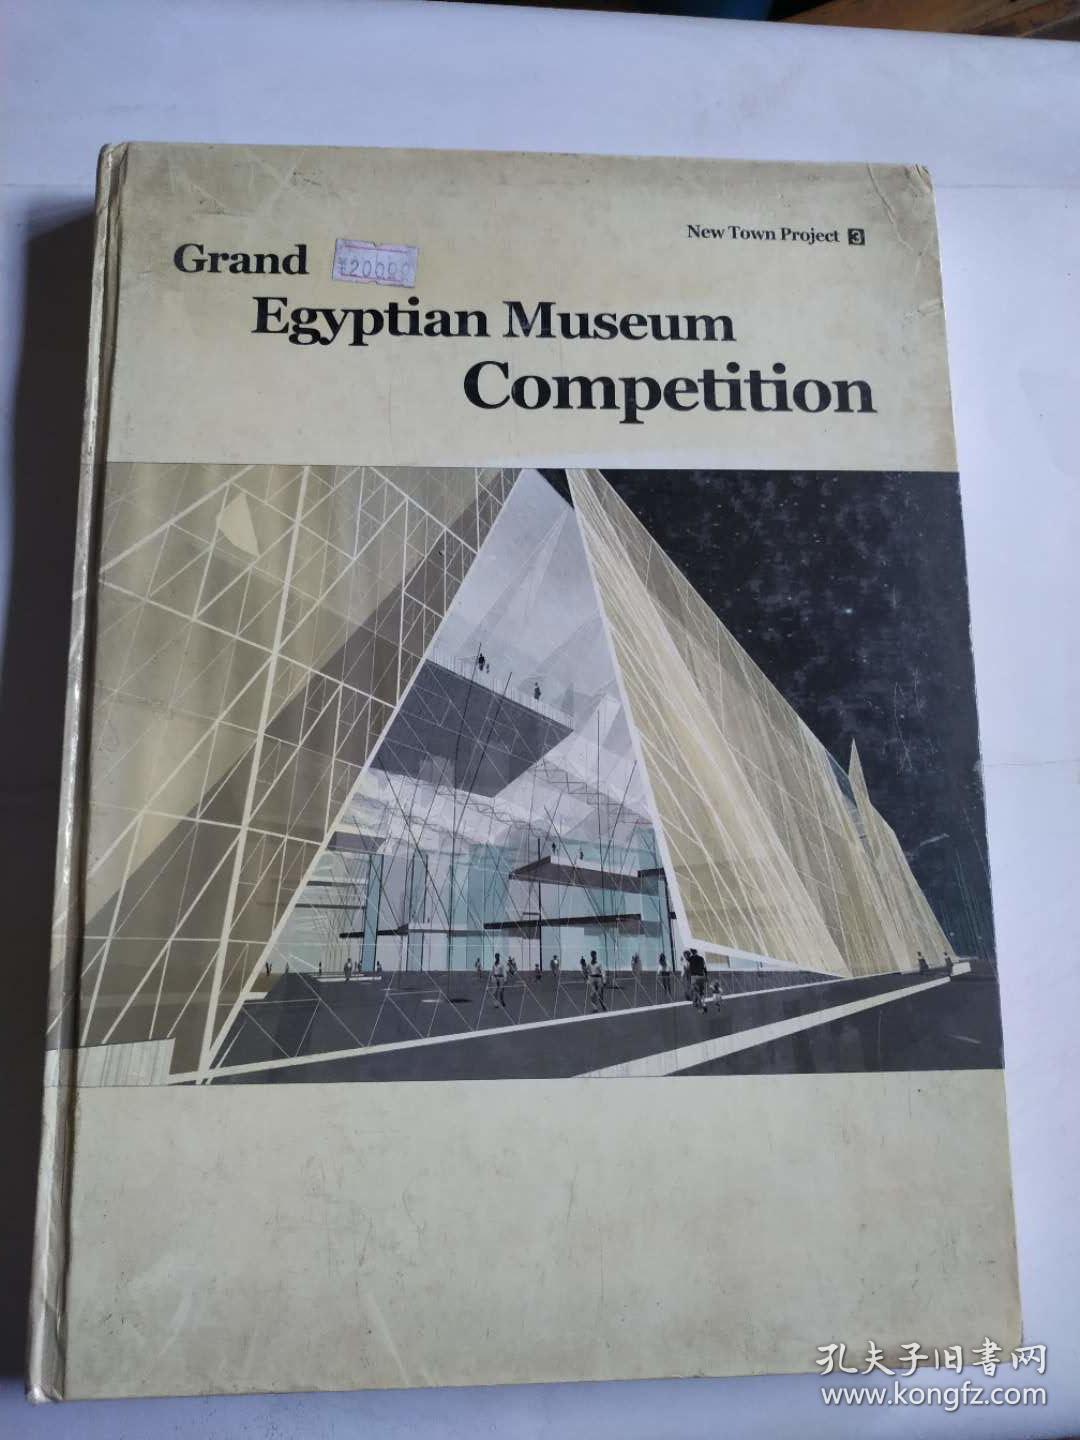 Grand Egyptian Museum Comprtition